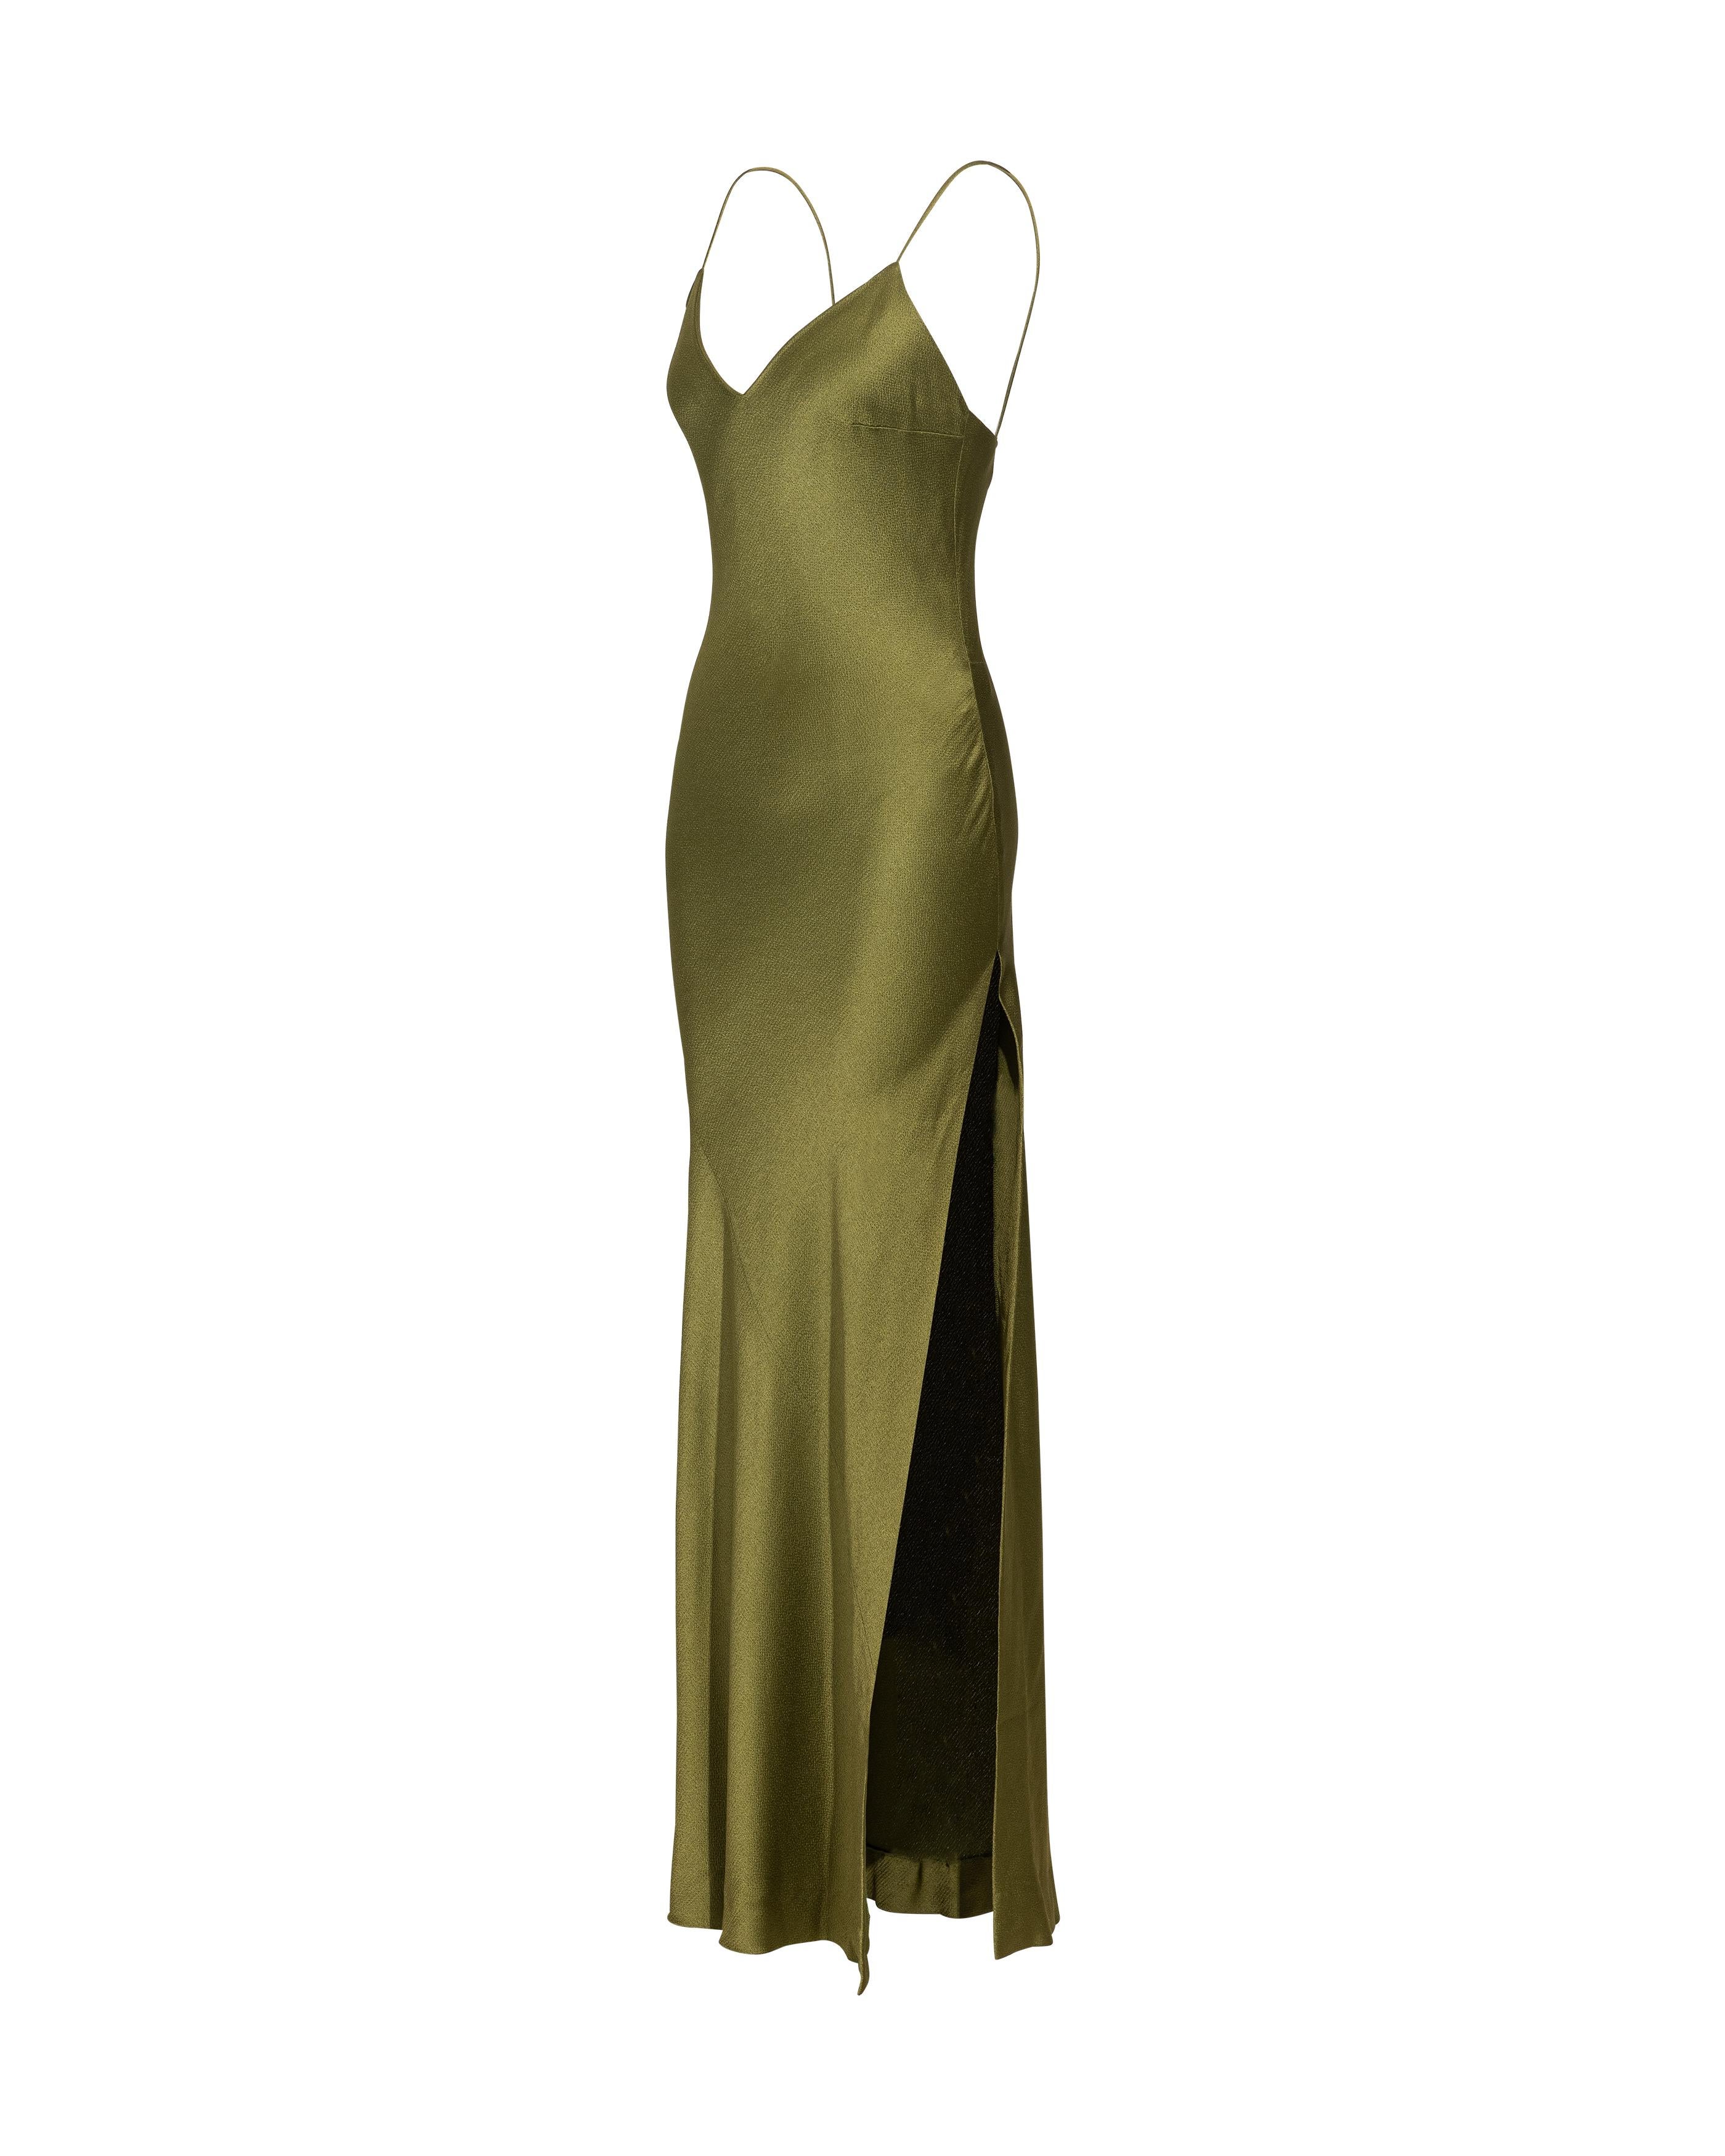 S/S 1999 Christian Dior by John Galliano Olive Green Bias Cut Slip Gown In Excellent Condition In North Hollywood, CA